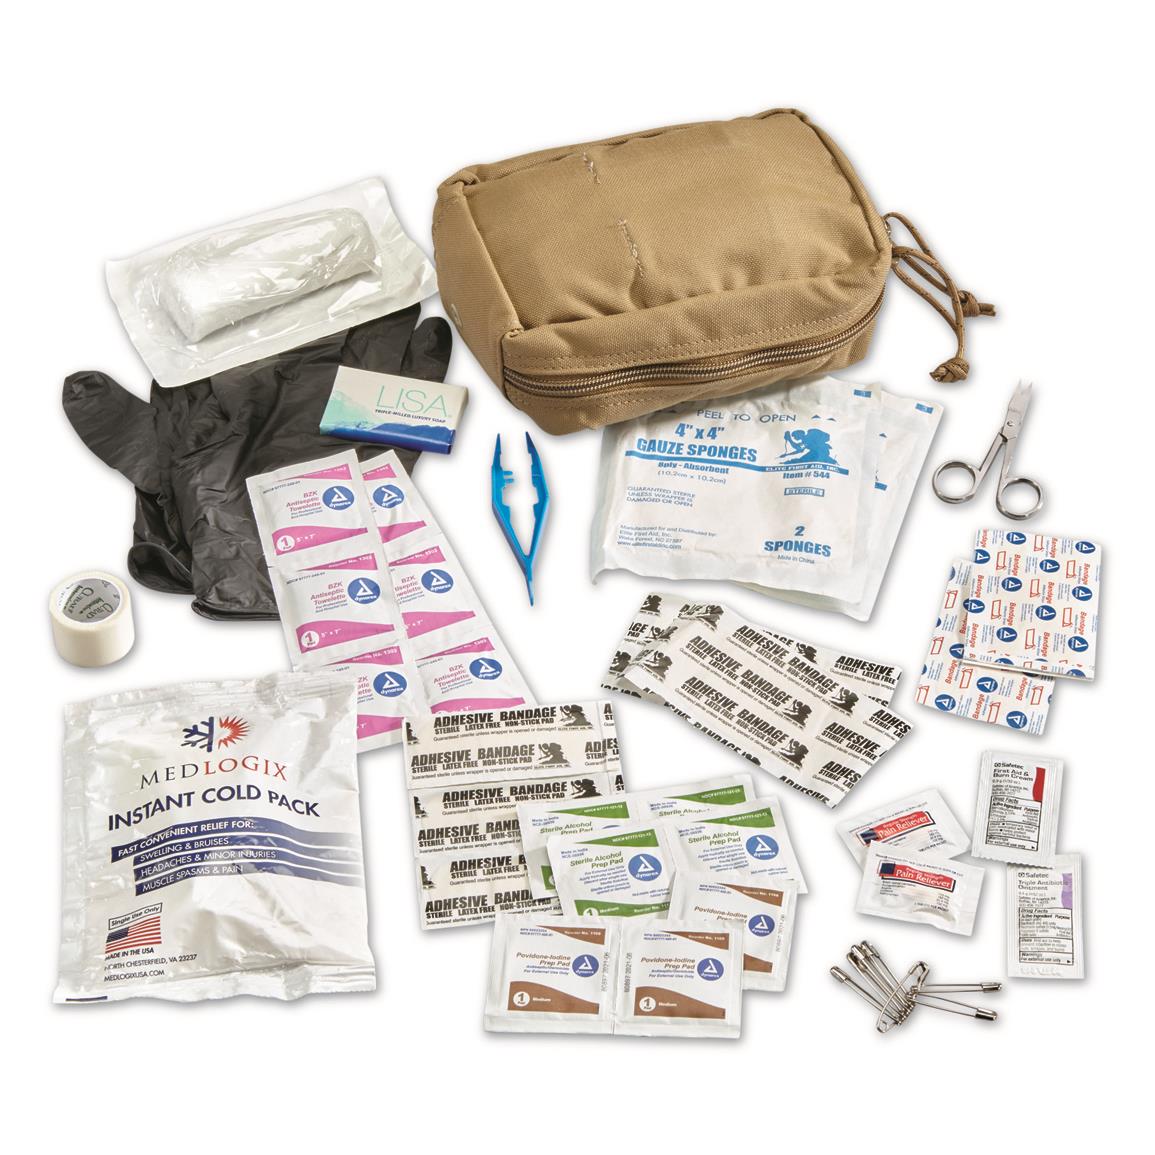 Includes First Aid Kit materials, Coyote